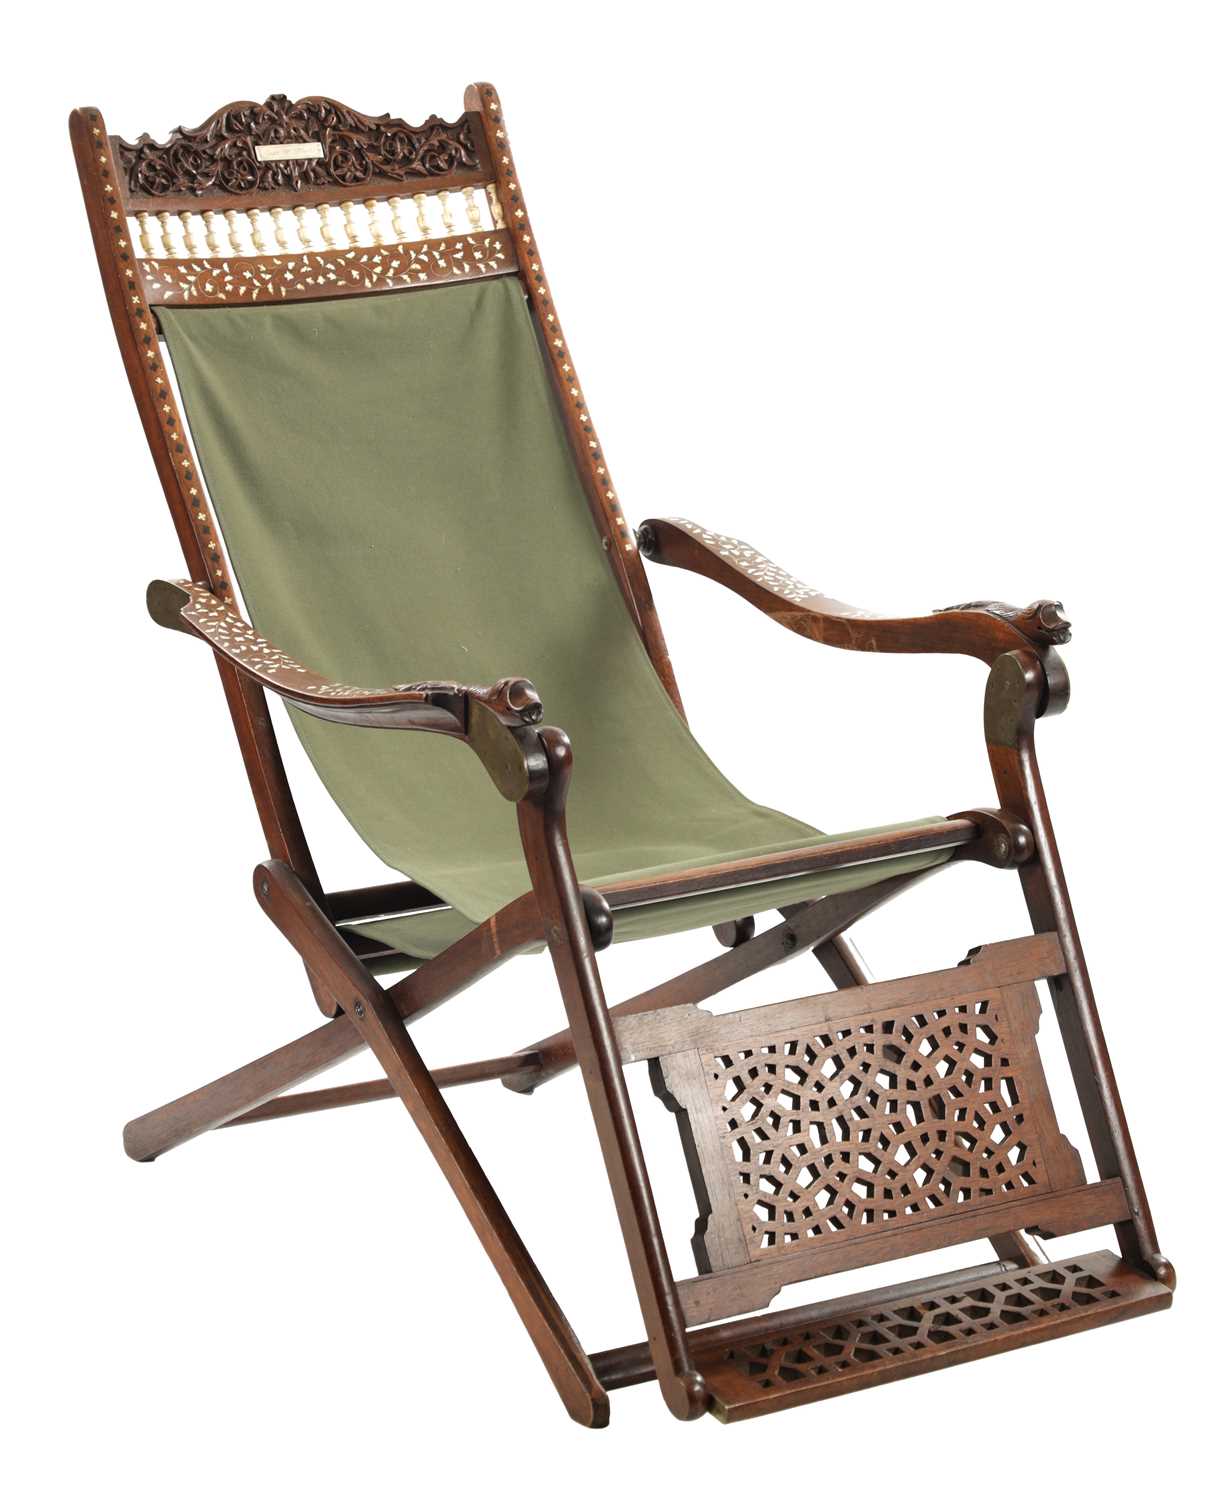 A LATE 19TH CENTURY ANGLO INDIAN IVORY INLAID HARDWOOD FOLDING CHAIR